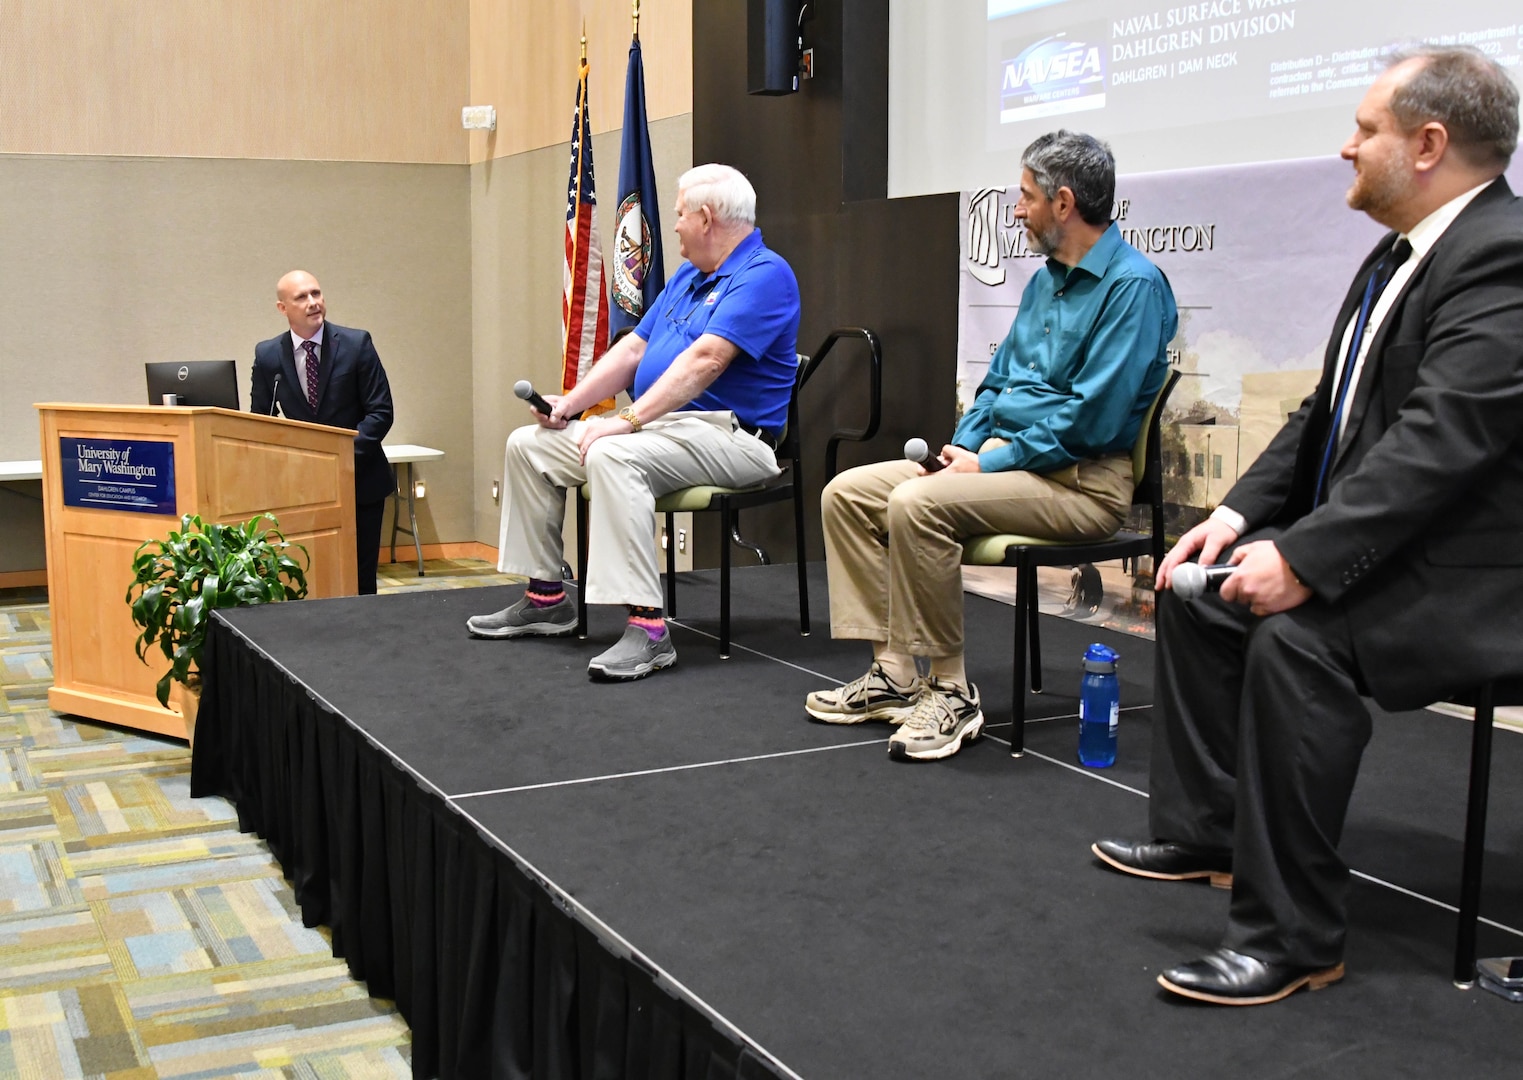 IMAGE: Sam Koski (far left), Deputy Director for Warfare Integration Digital Warfare Office at Naval Surface Warfare Center Dahlgren Division (NSWCDD), facilitated the panel discussion on day two of the NSWCDD Modeling and Simulation (M&S) Community of Interest M&S Summit July 26 at University of Mary Washington’s Dahlgren Campus.